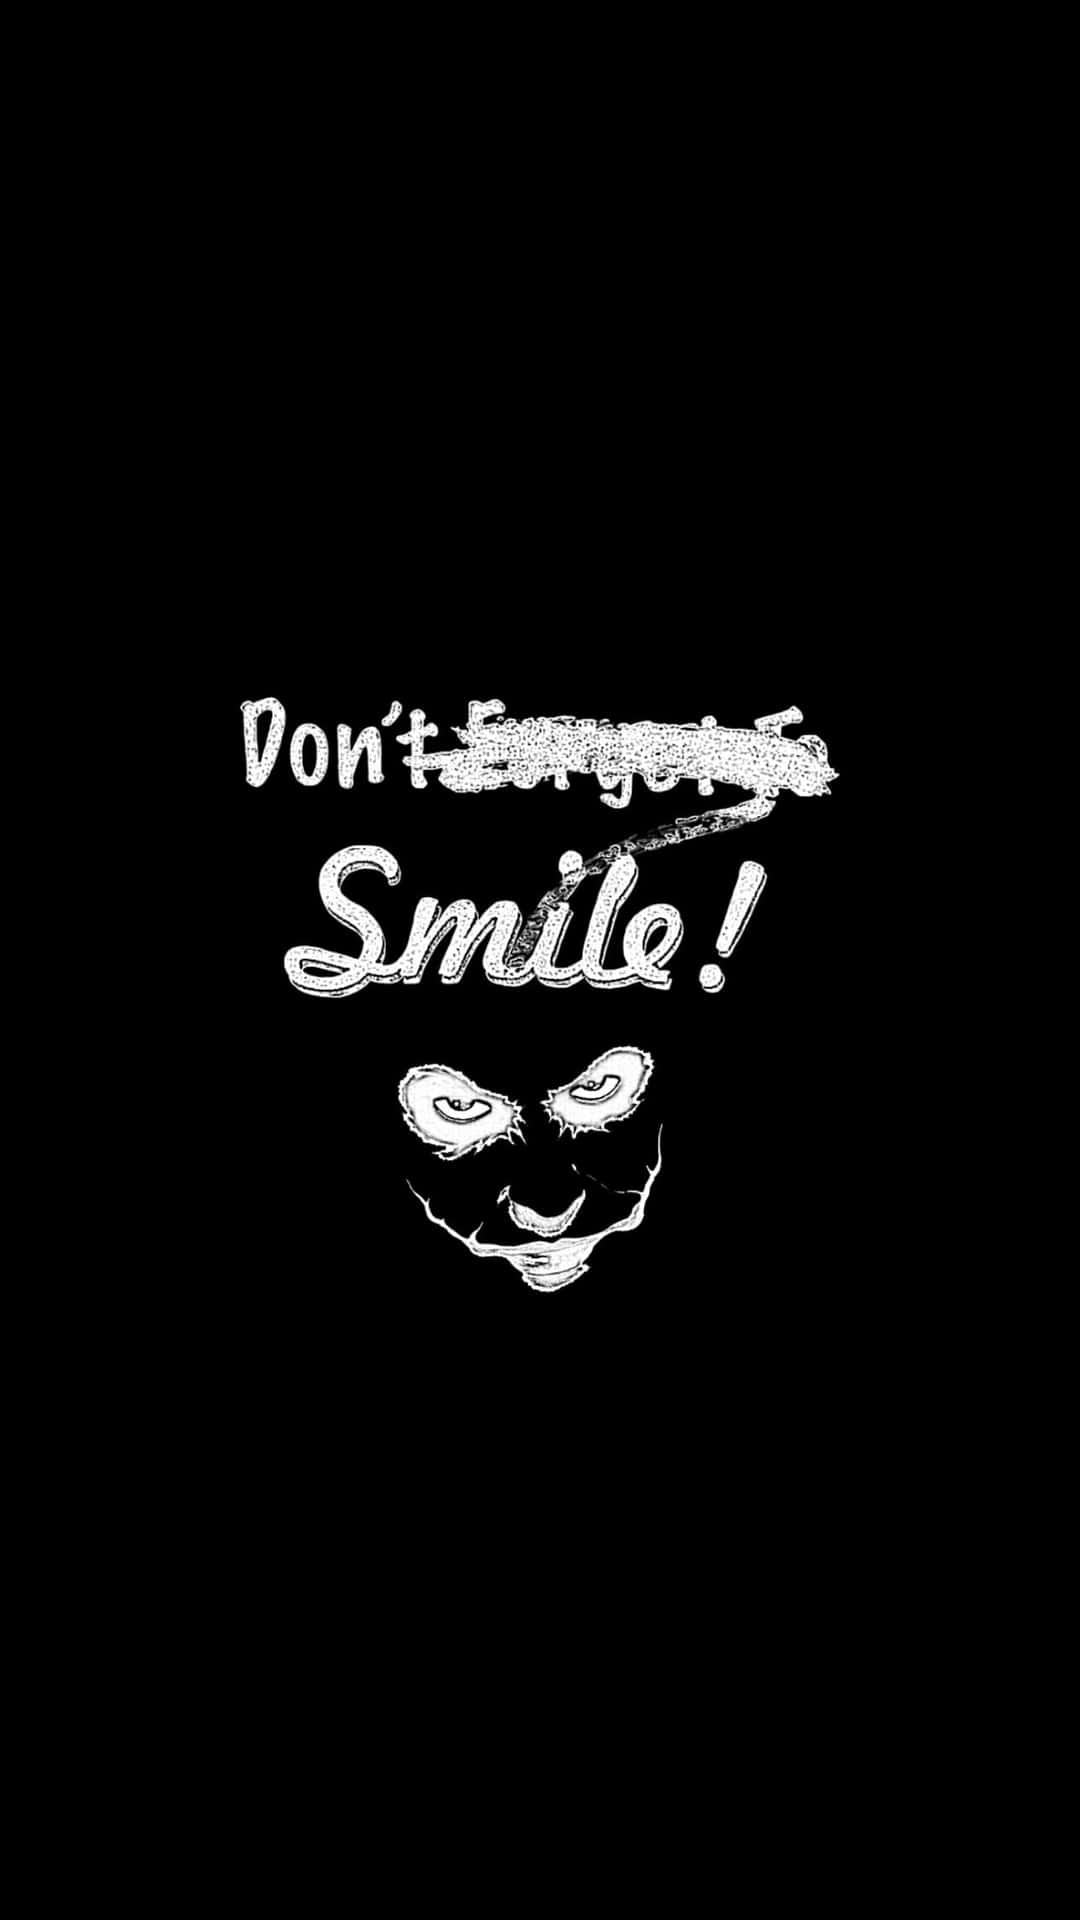 Thought-provoking Joker Quote on a Dark Background Wallpaper